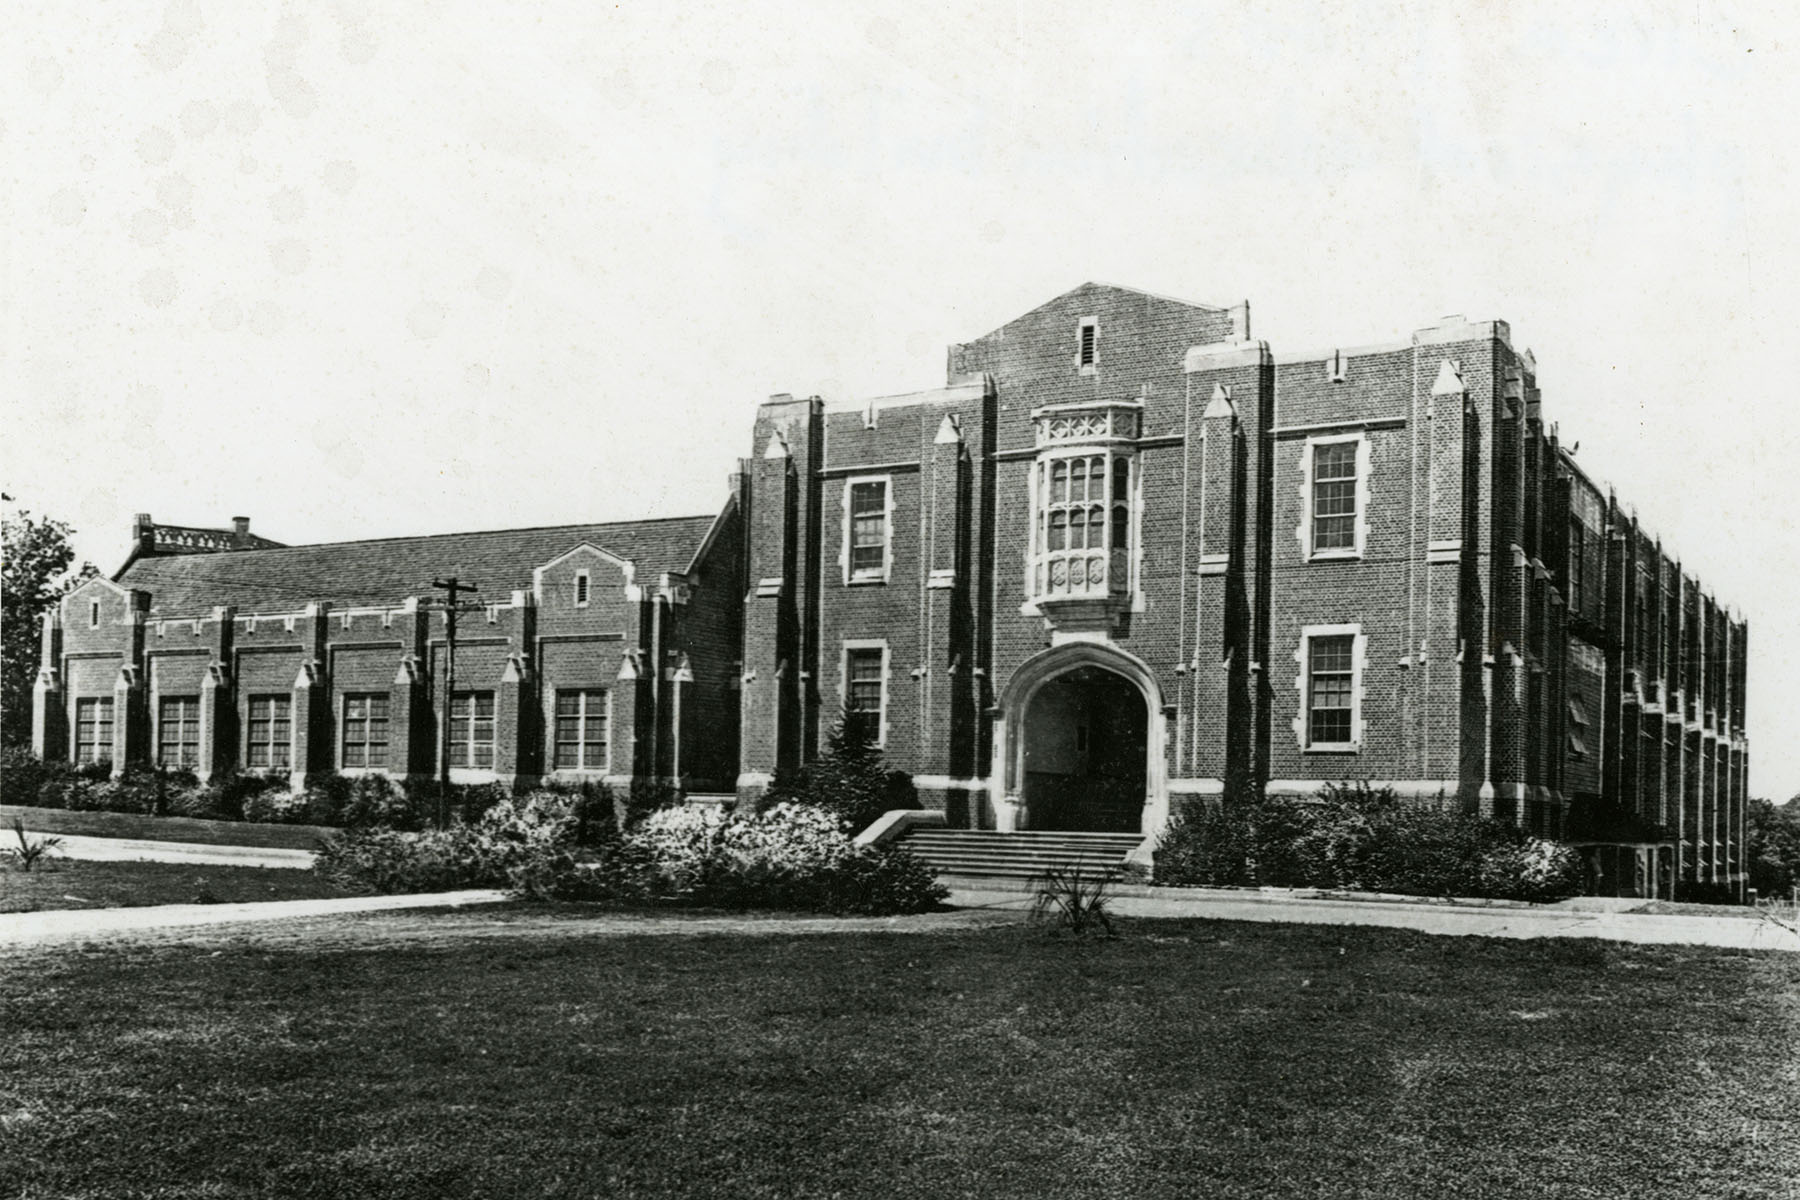 1940 view of then Physical Education Building, now Montgomery. (FSU Special Collections & Archives)